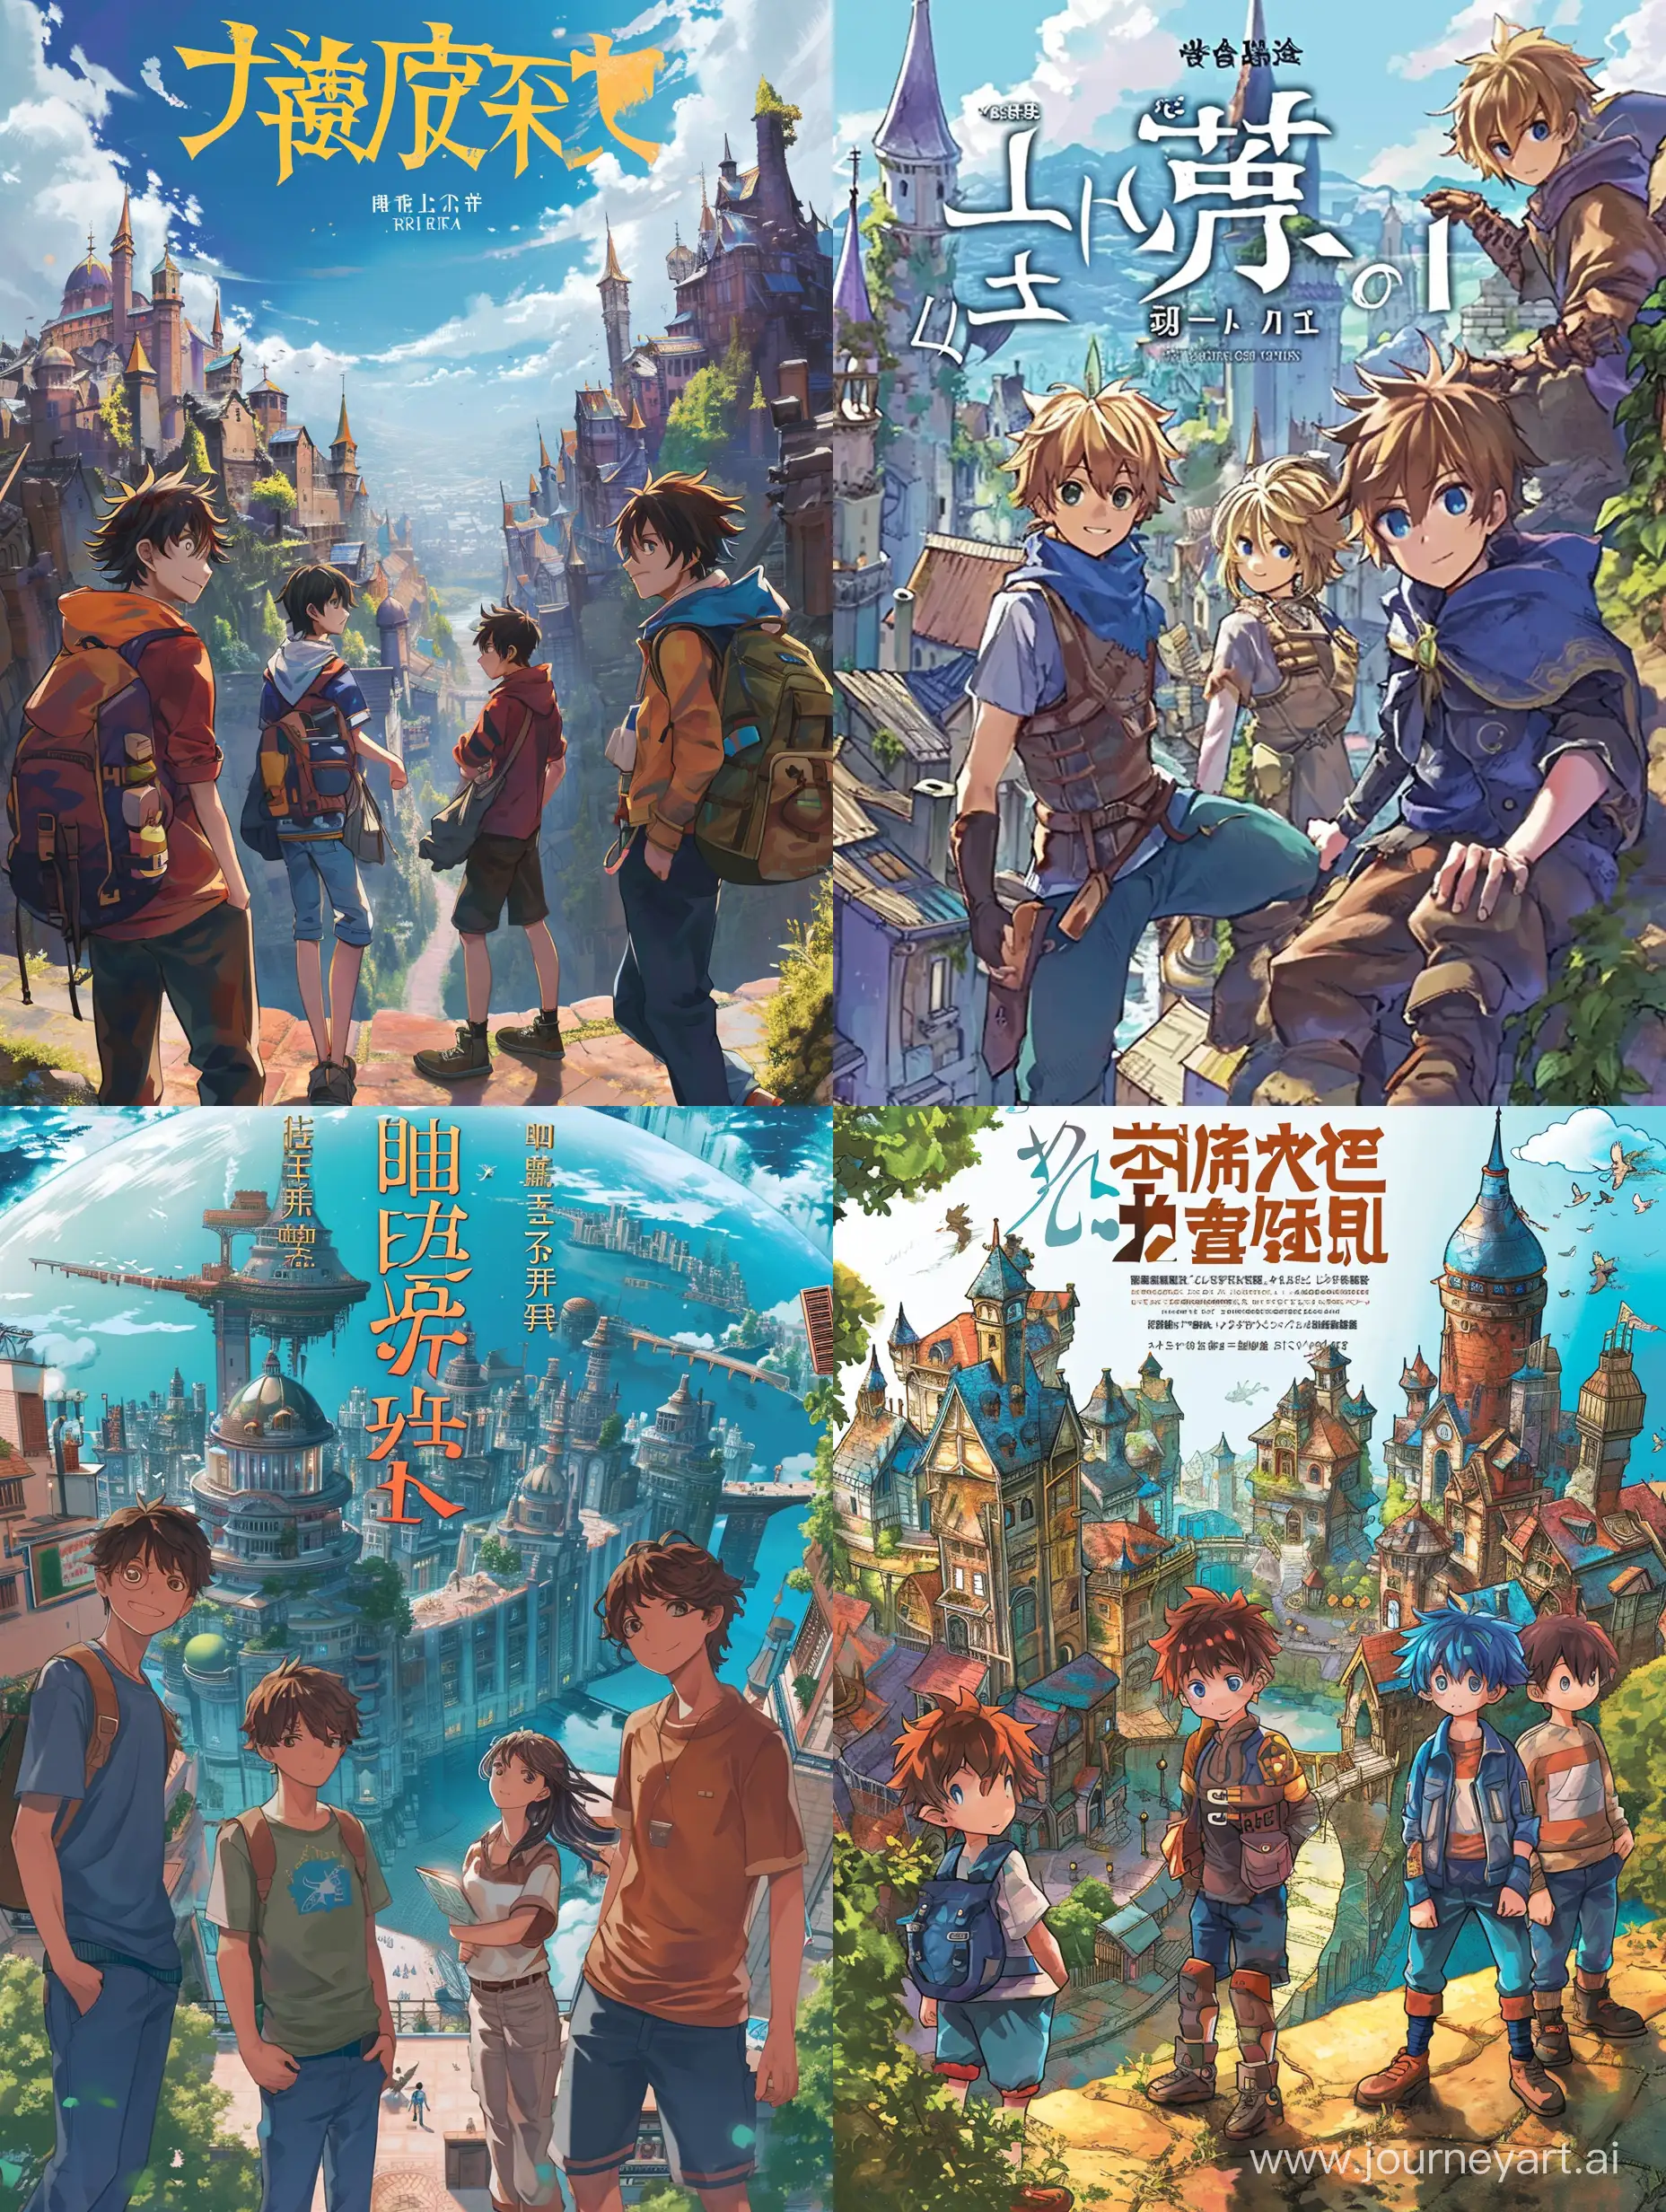 The cover for light novel, three boys and one girl, fantasy city, fantasy world with buildings.